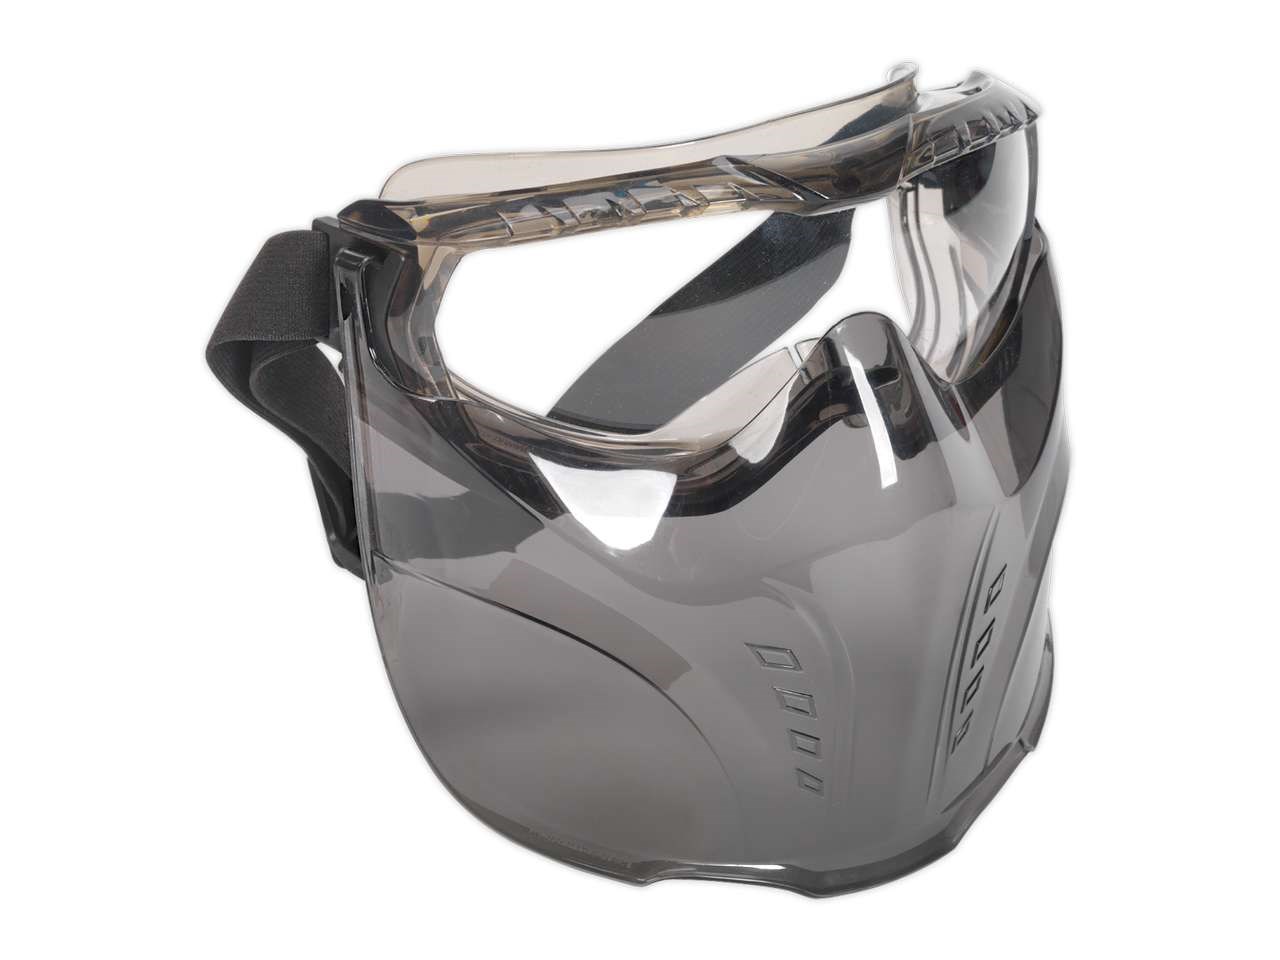 Sealey Ssp76 Safety Goggles With Detachable Face Shield